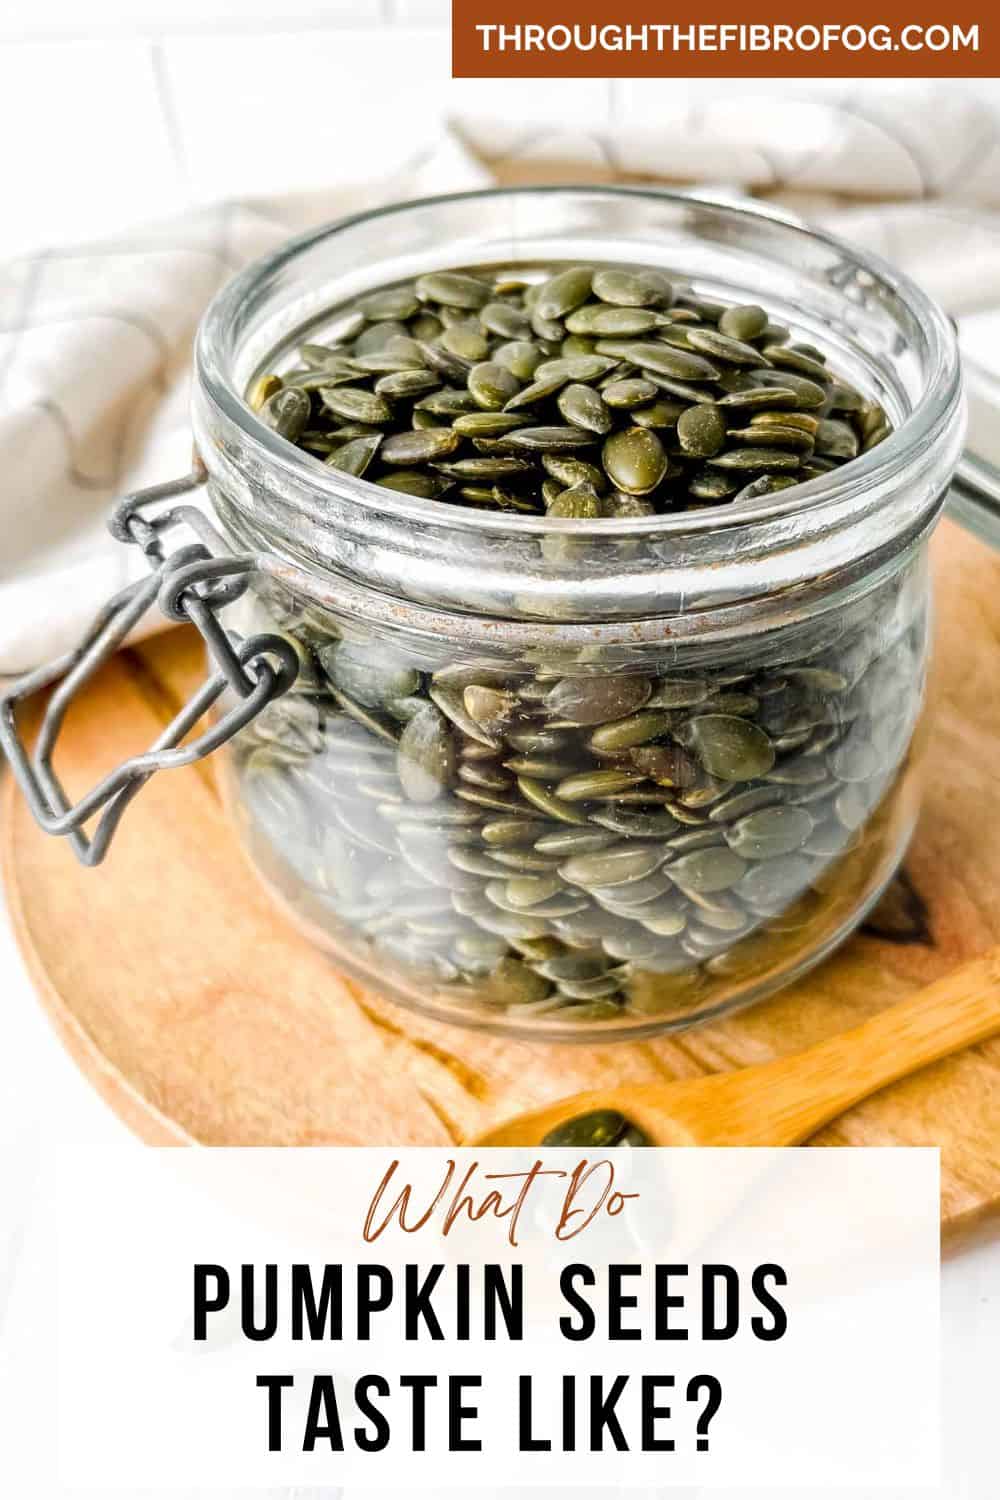 labelled what do pumpkin seeds taste like with a glass jar of pumpkin seeds on a wooden board.